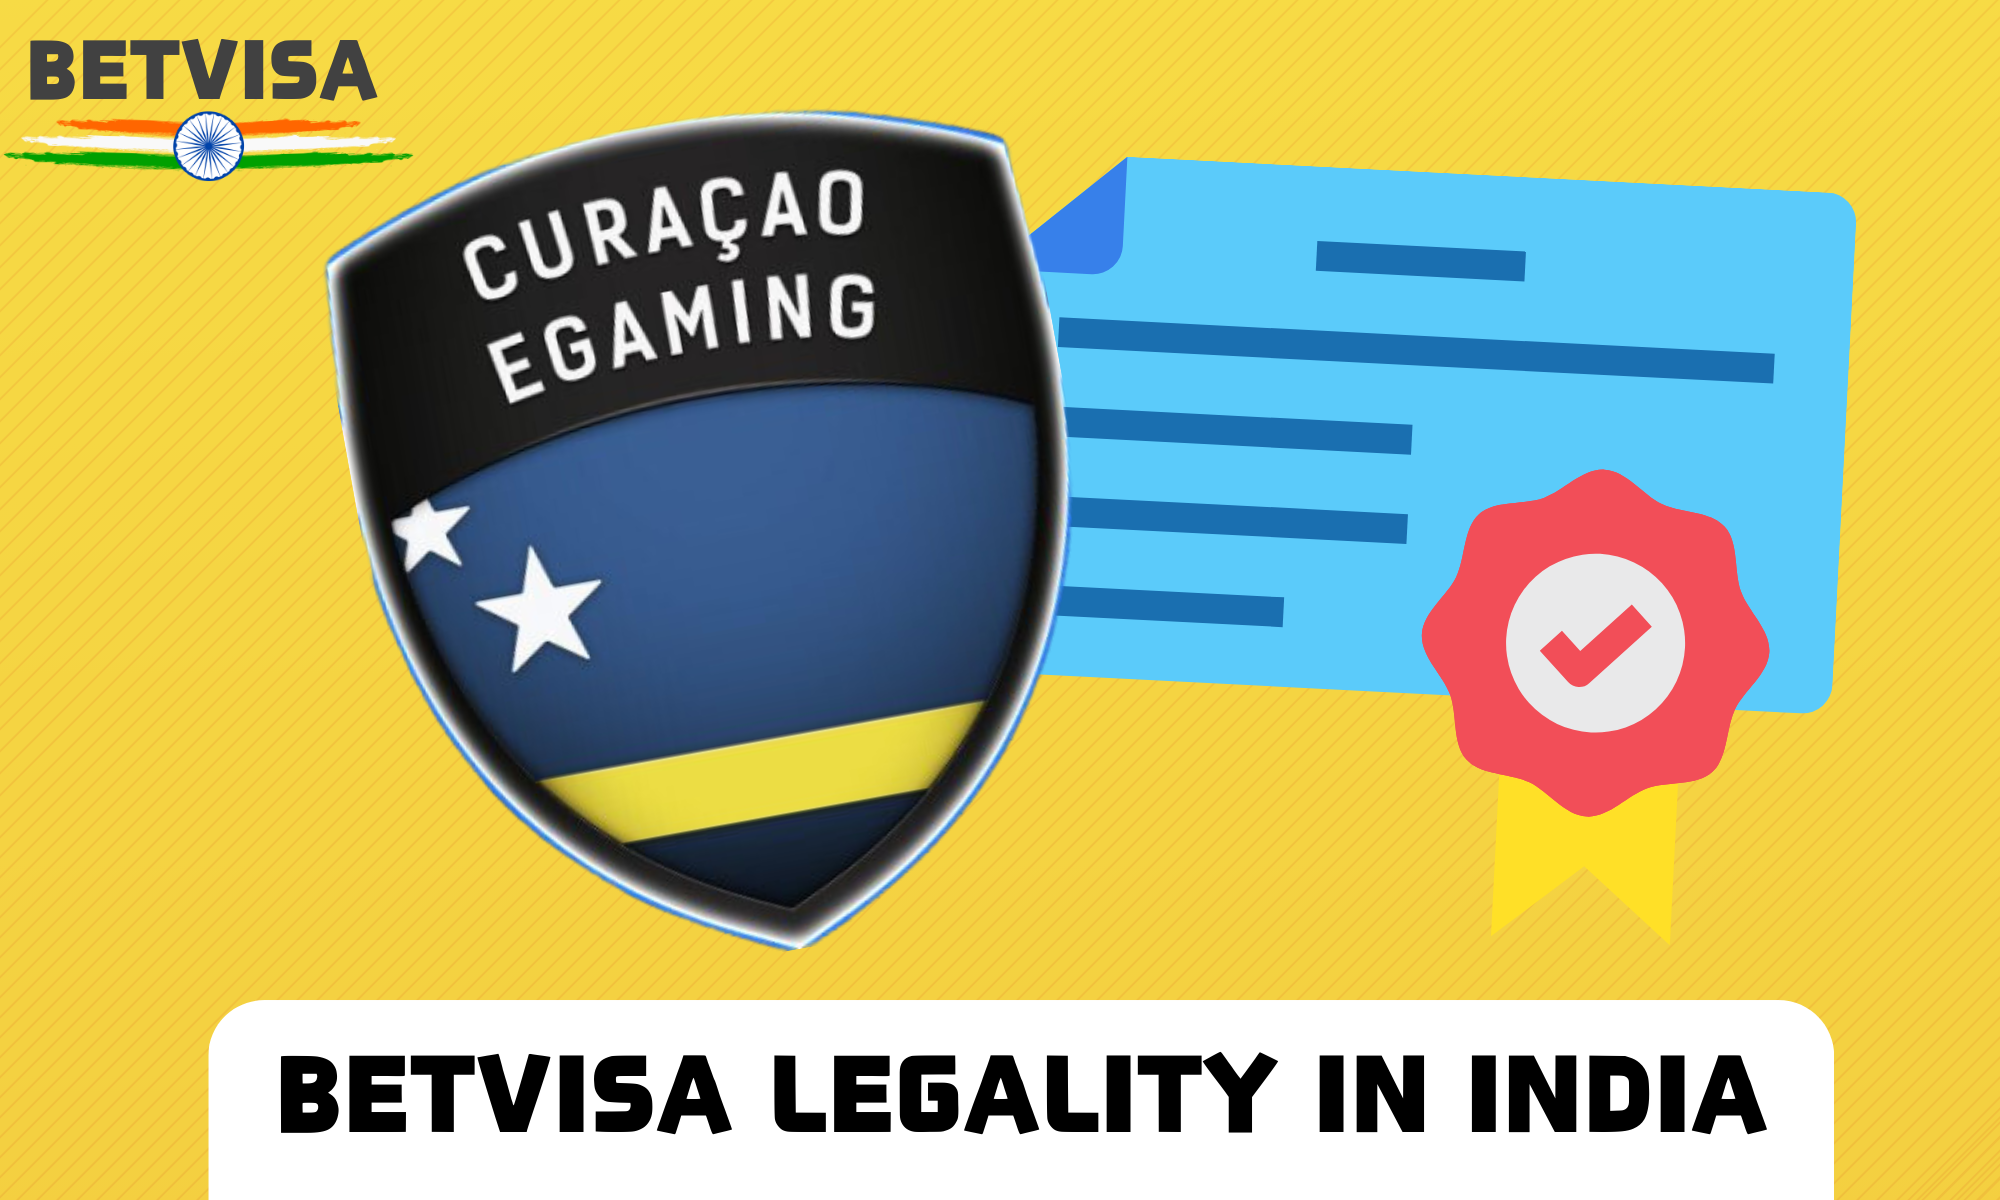 Betvisa, a company fully legal in India and licensed in Curacao